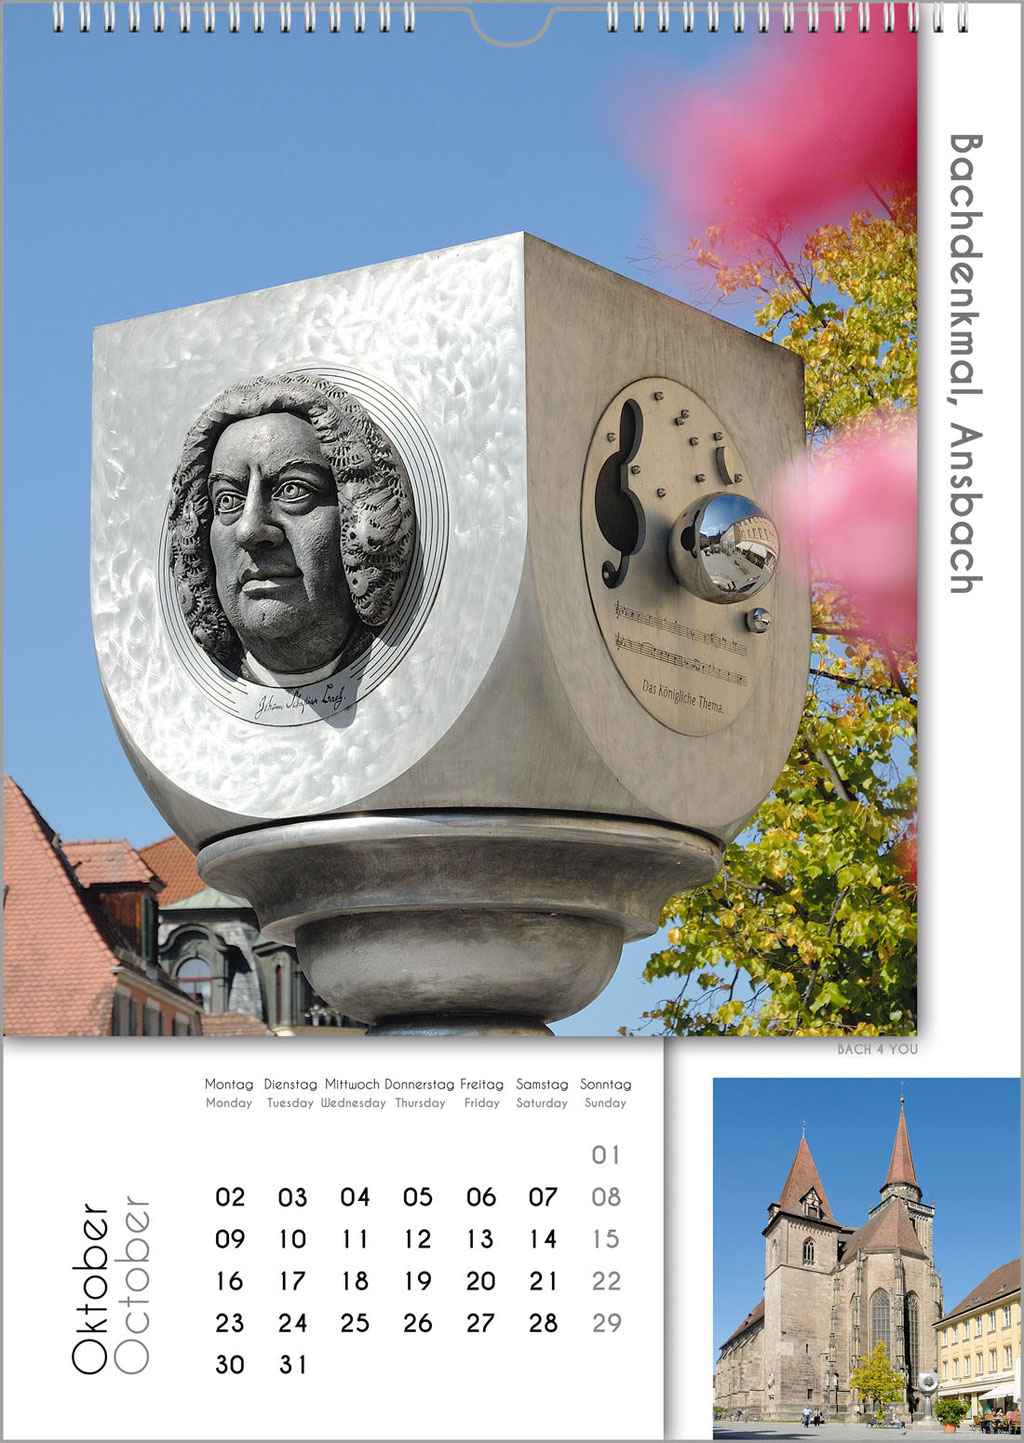 Bach-Monuments ... Bach Calendars Are Music Calendars and Music Gifts.